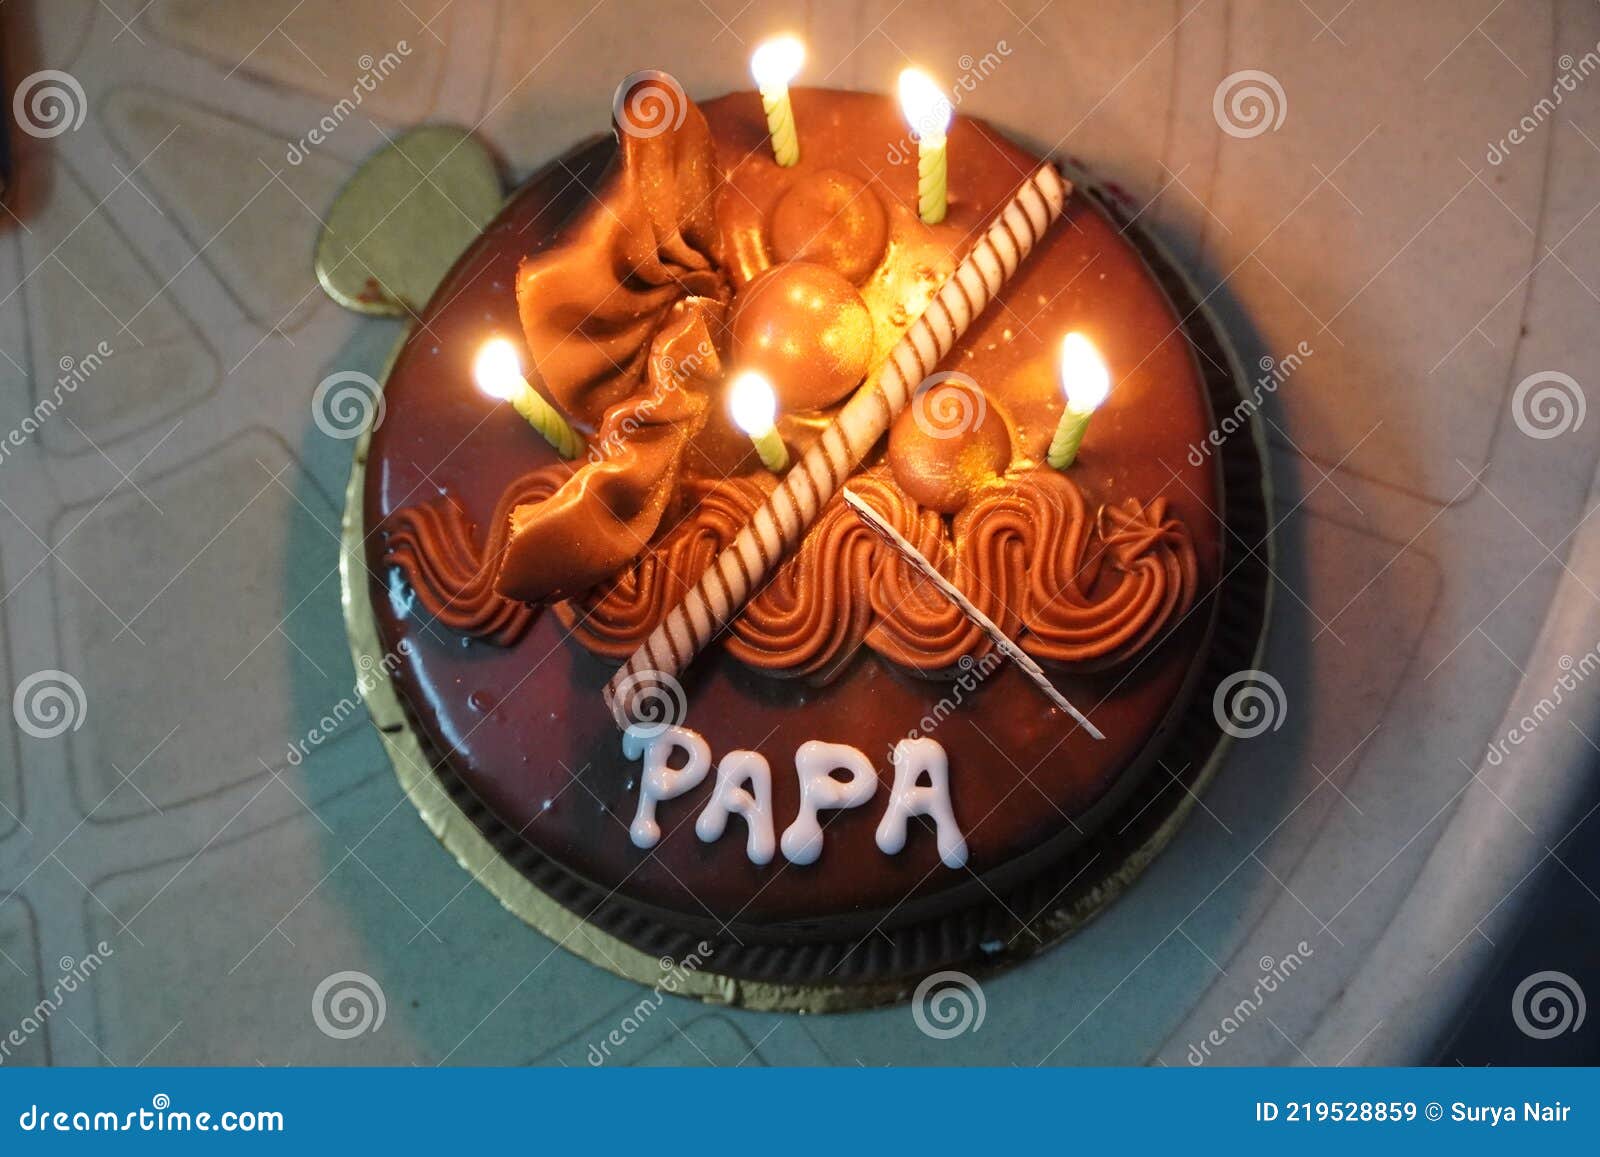 Birthday Cake for Dad Written Stock Image - Image of chocolate ...